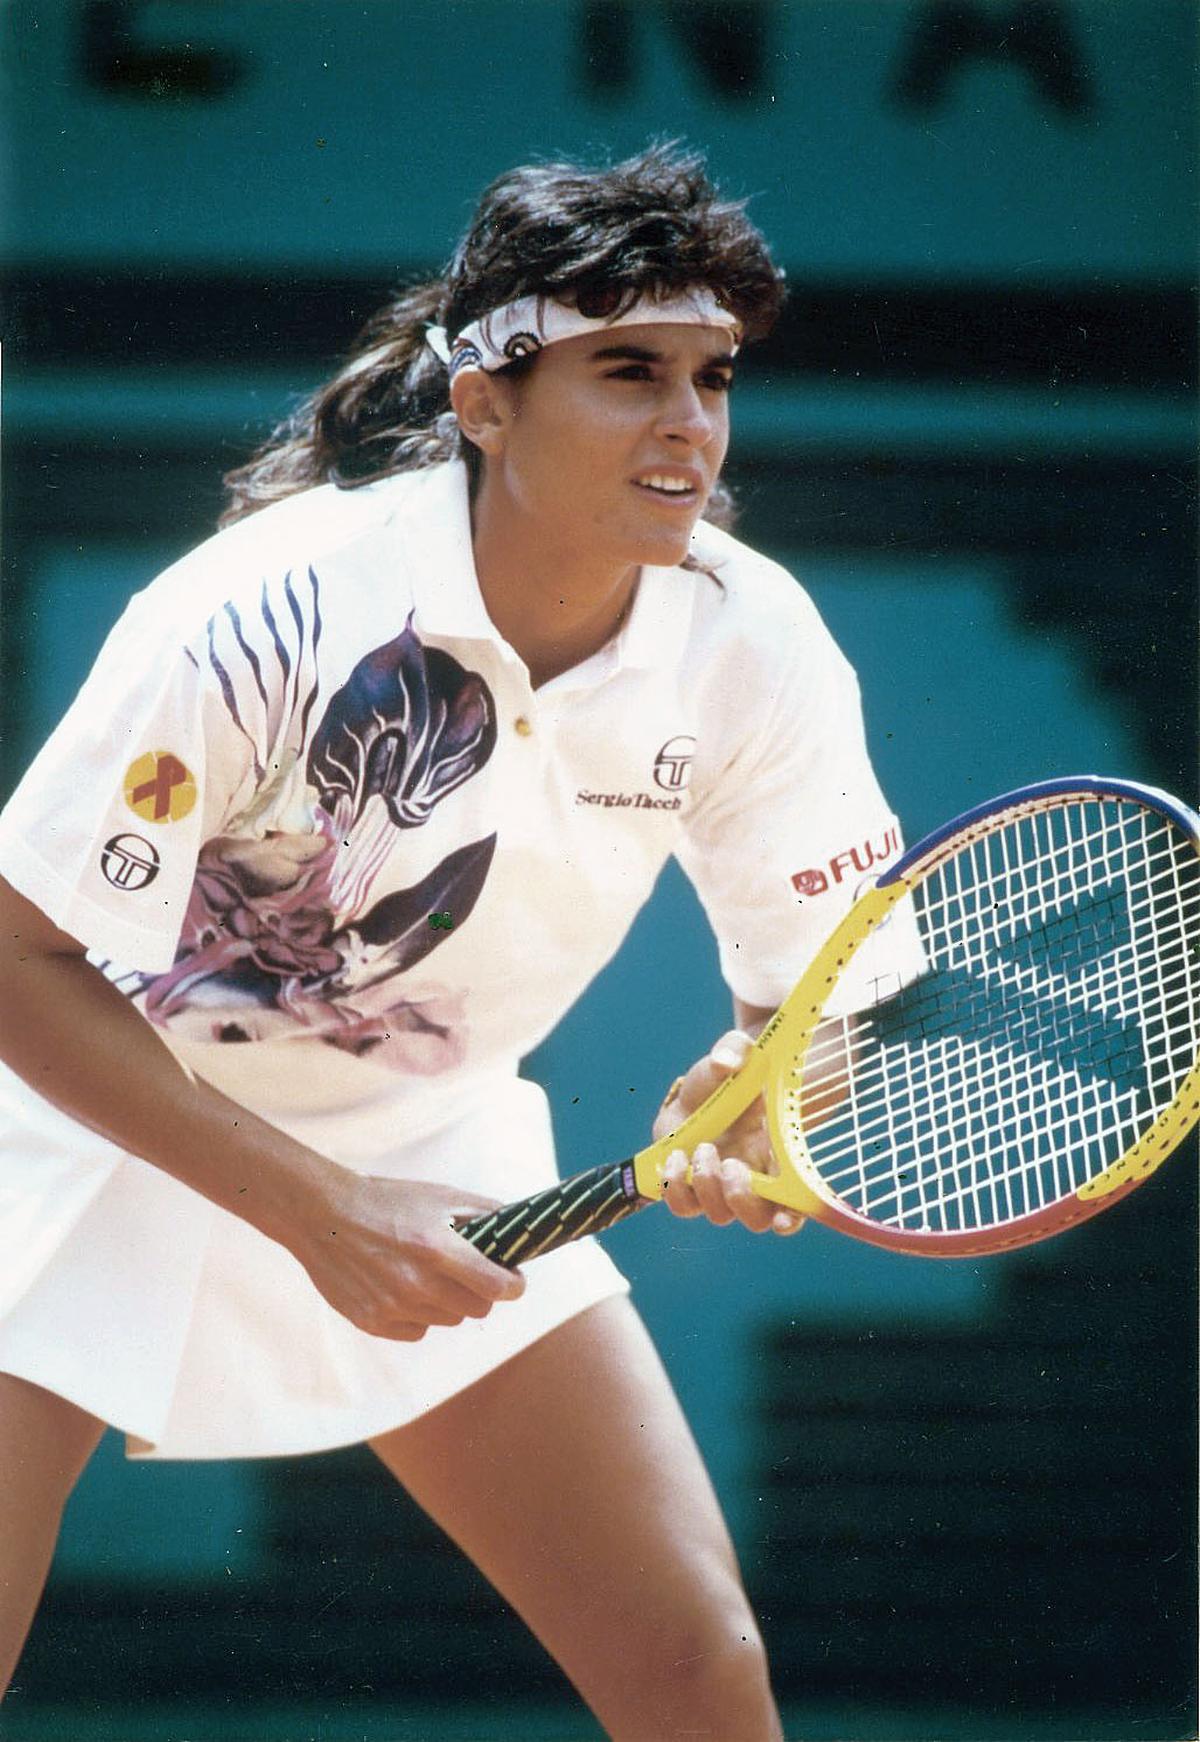 Argentina’s Gabriela Sabatini in action during a tennis tournament in 1995.